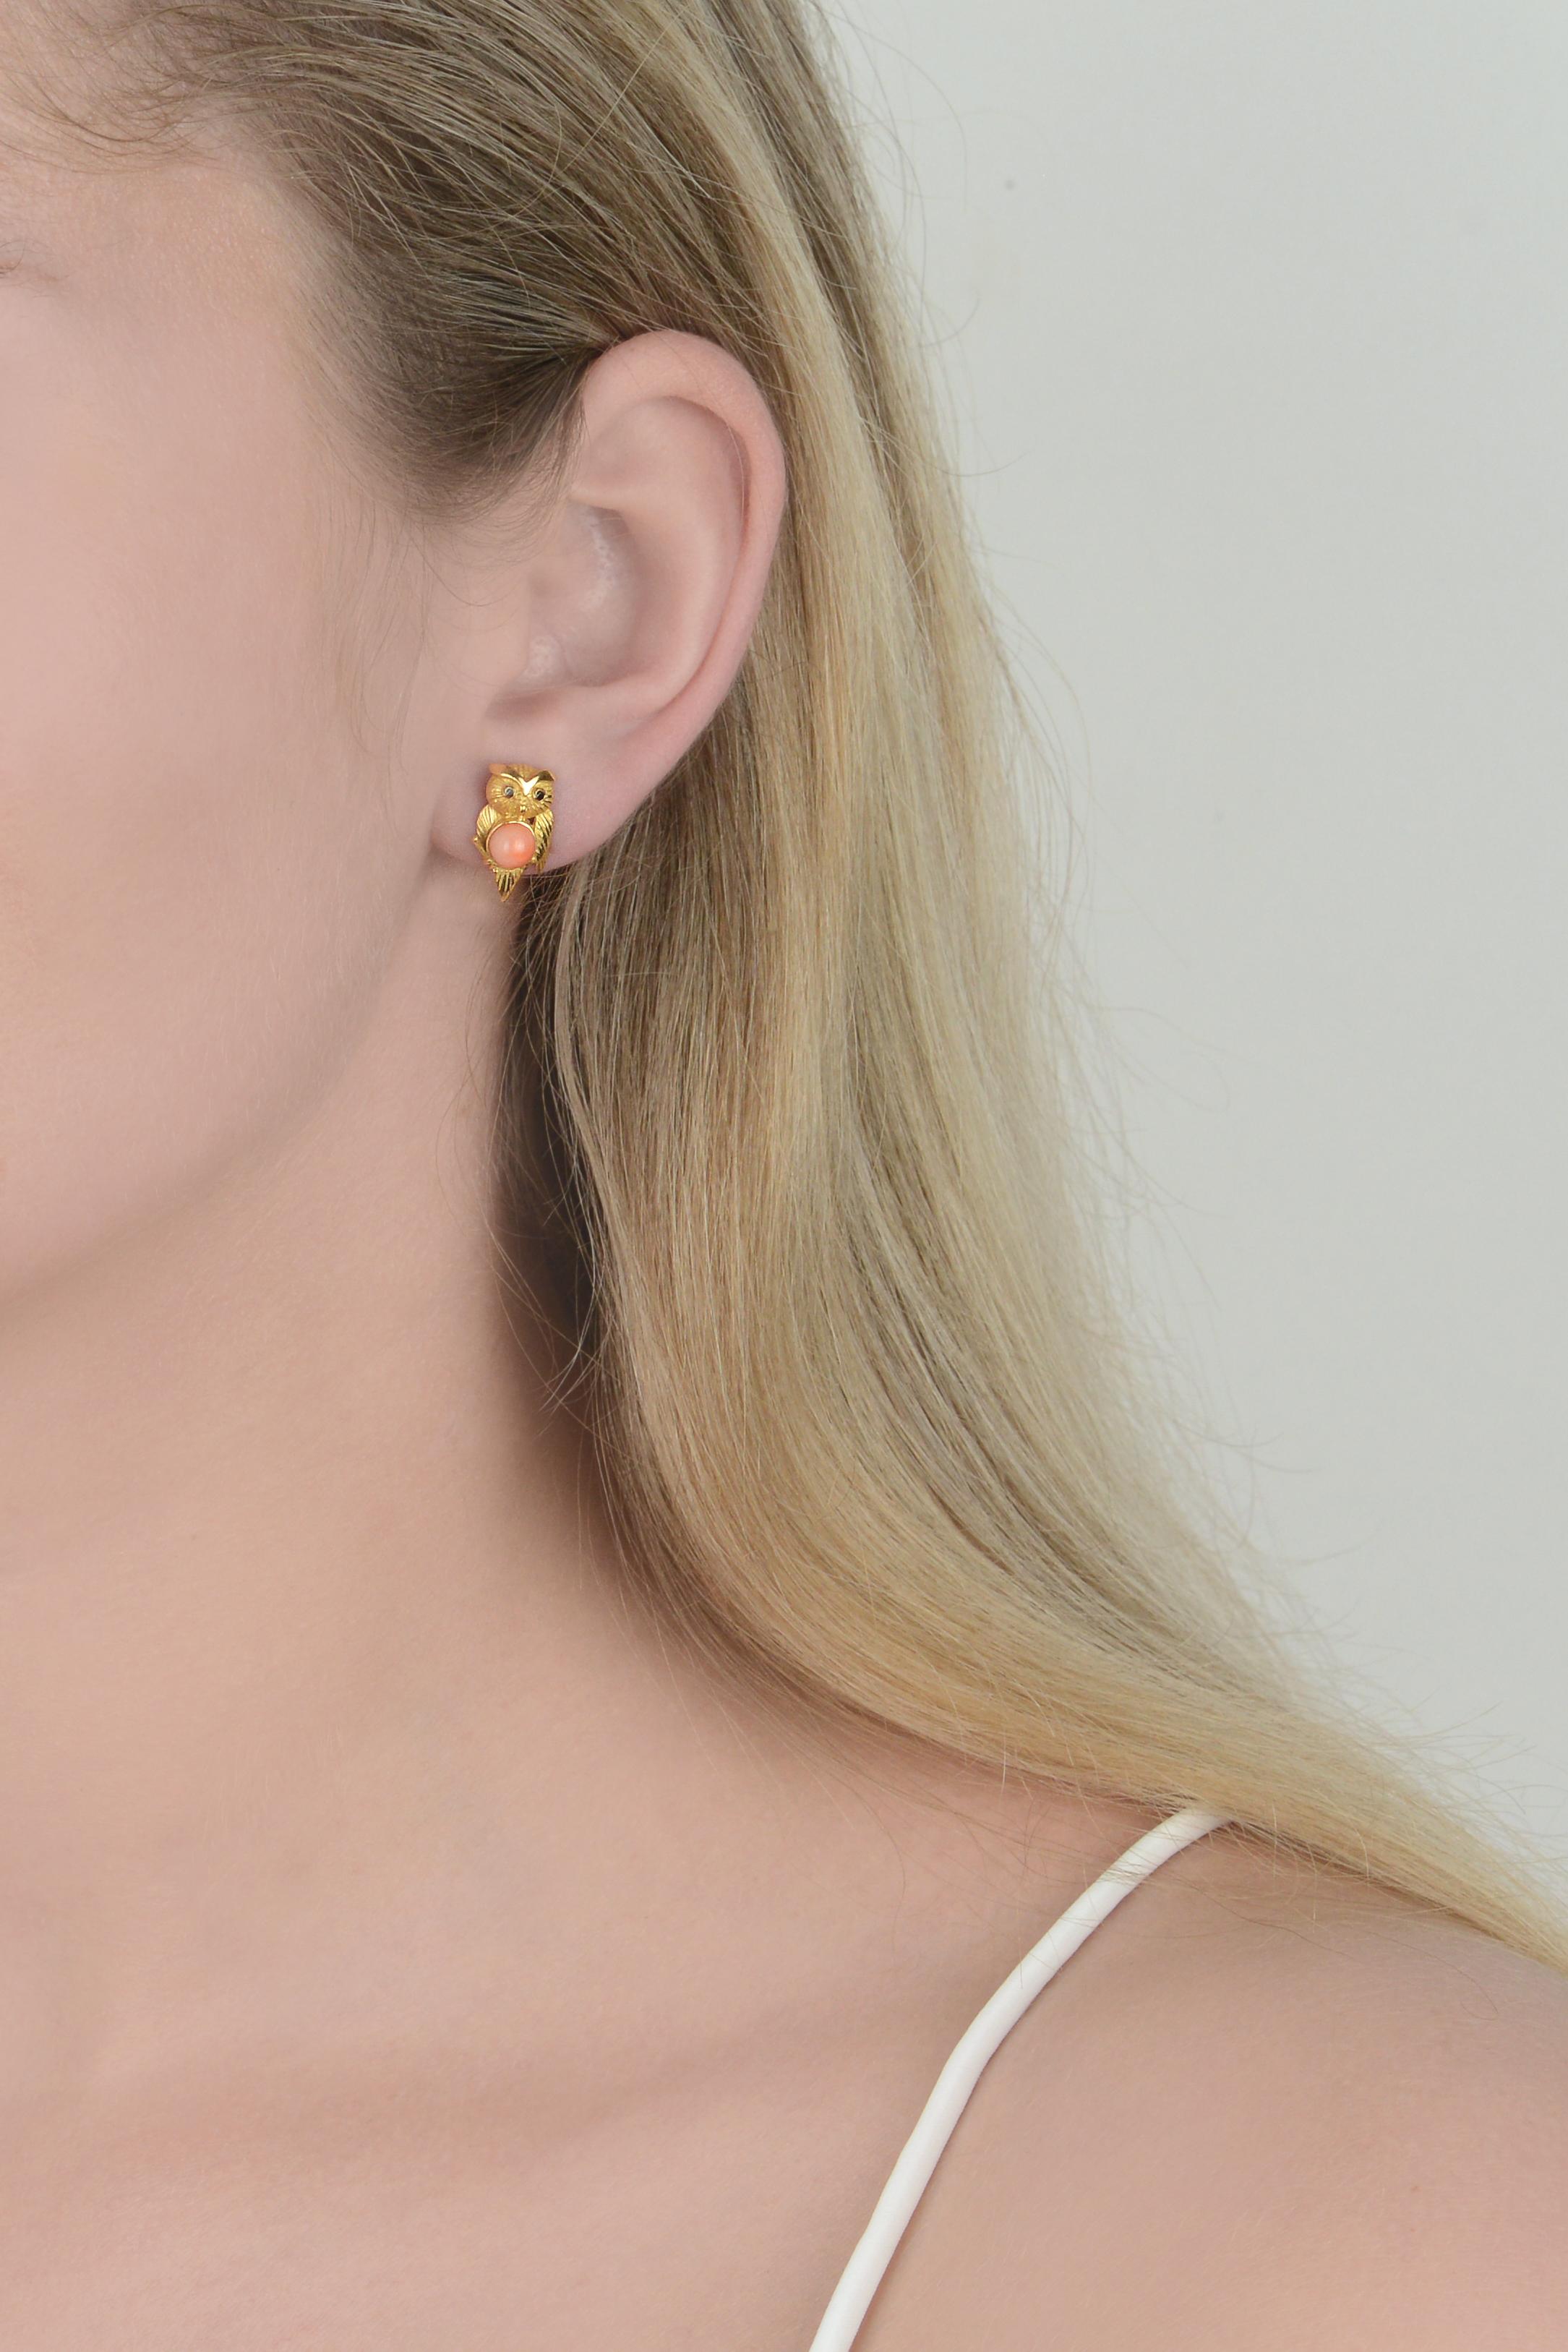 Yvonne Leon's Pari of Owl Earrings Studs in Yellow Gold 18 Carat and Corals In New Condition For Sale In Paris, FR